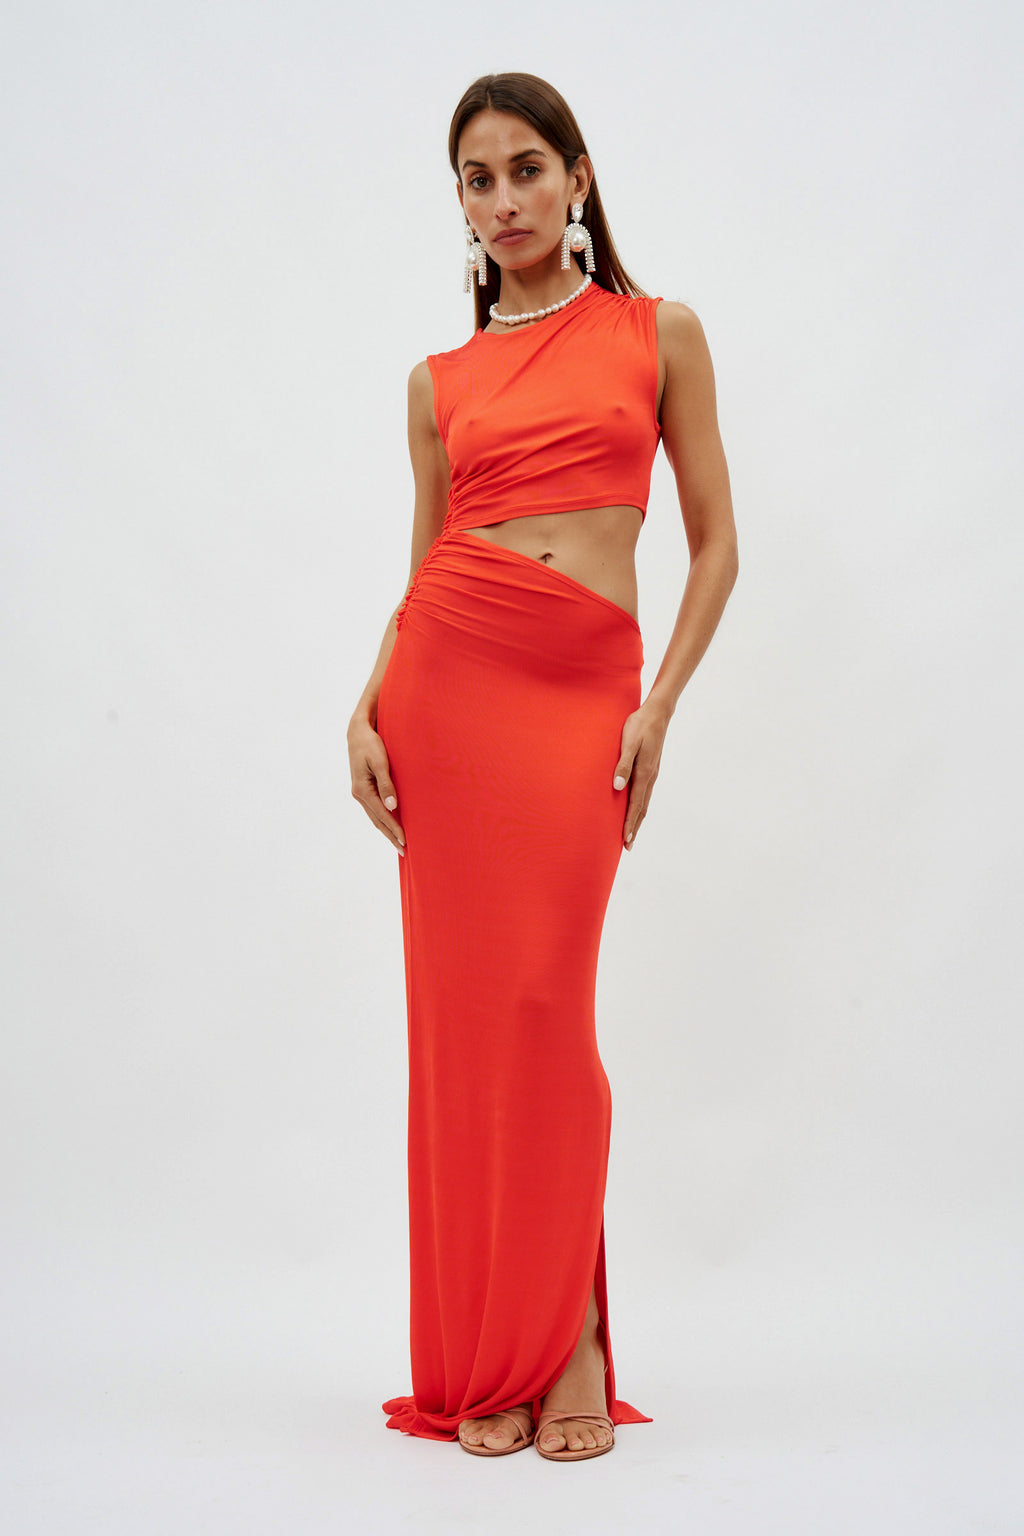 Cut Out Sleeveless Long Ribbed Tangerine Red Dress